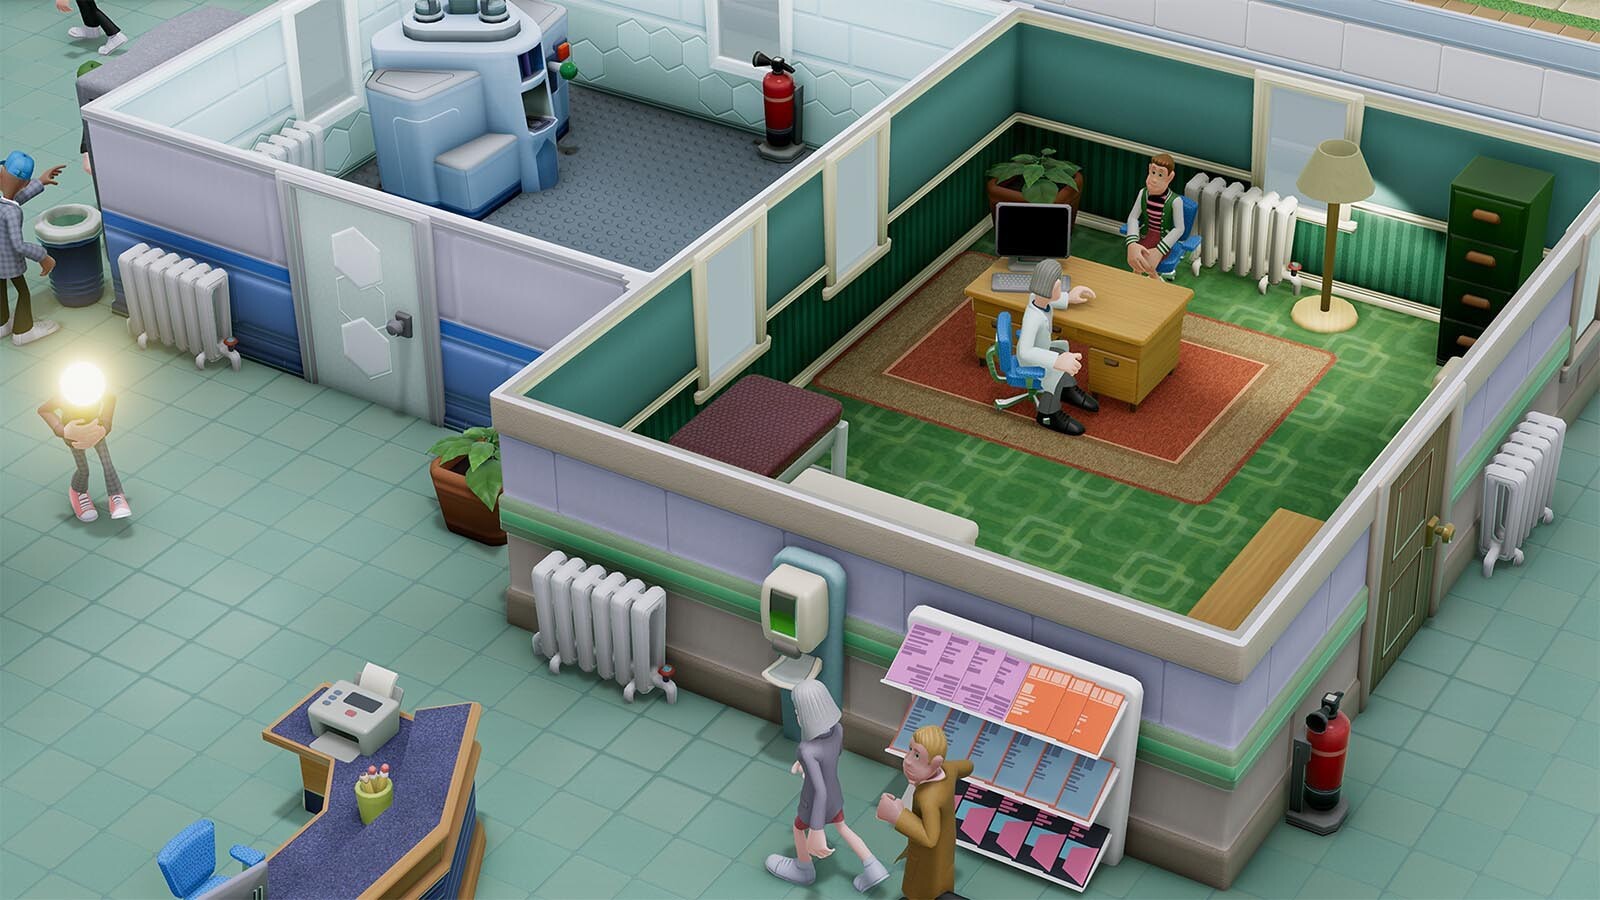 Two Point Hospital: Off the Grid, PC Steam Downloadable Content